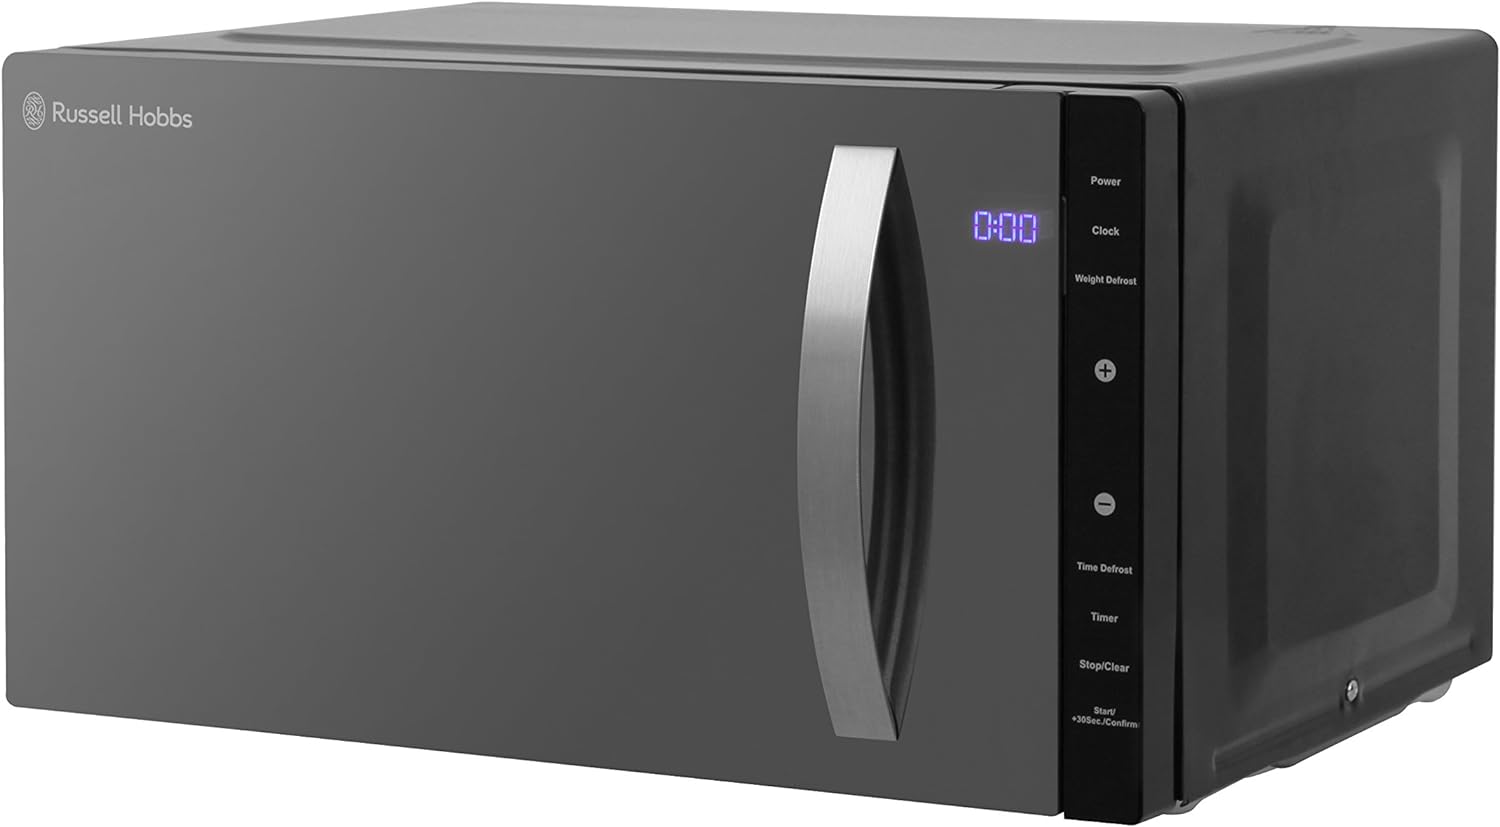 Russell Hobbs RHFM2363B 23 L 800 W Black Digital Flatbed Solo Freestanding Microwave with 5 Power Levels, 8 Auto Cook Menus, Easy Clean, Clock and Timer, Automatic Defrost